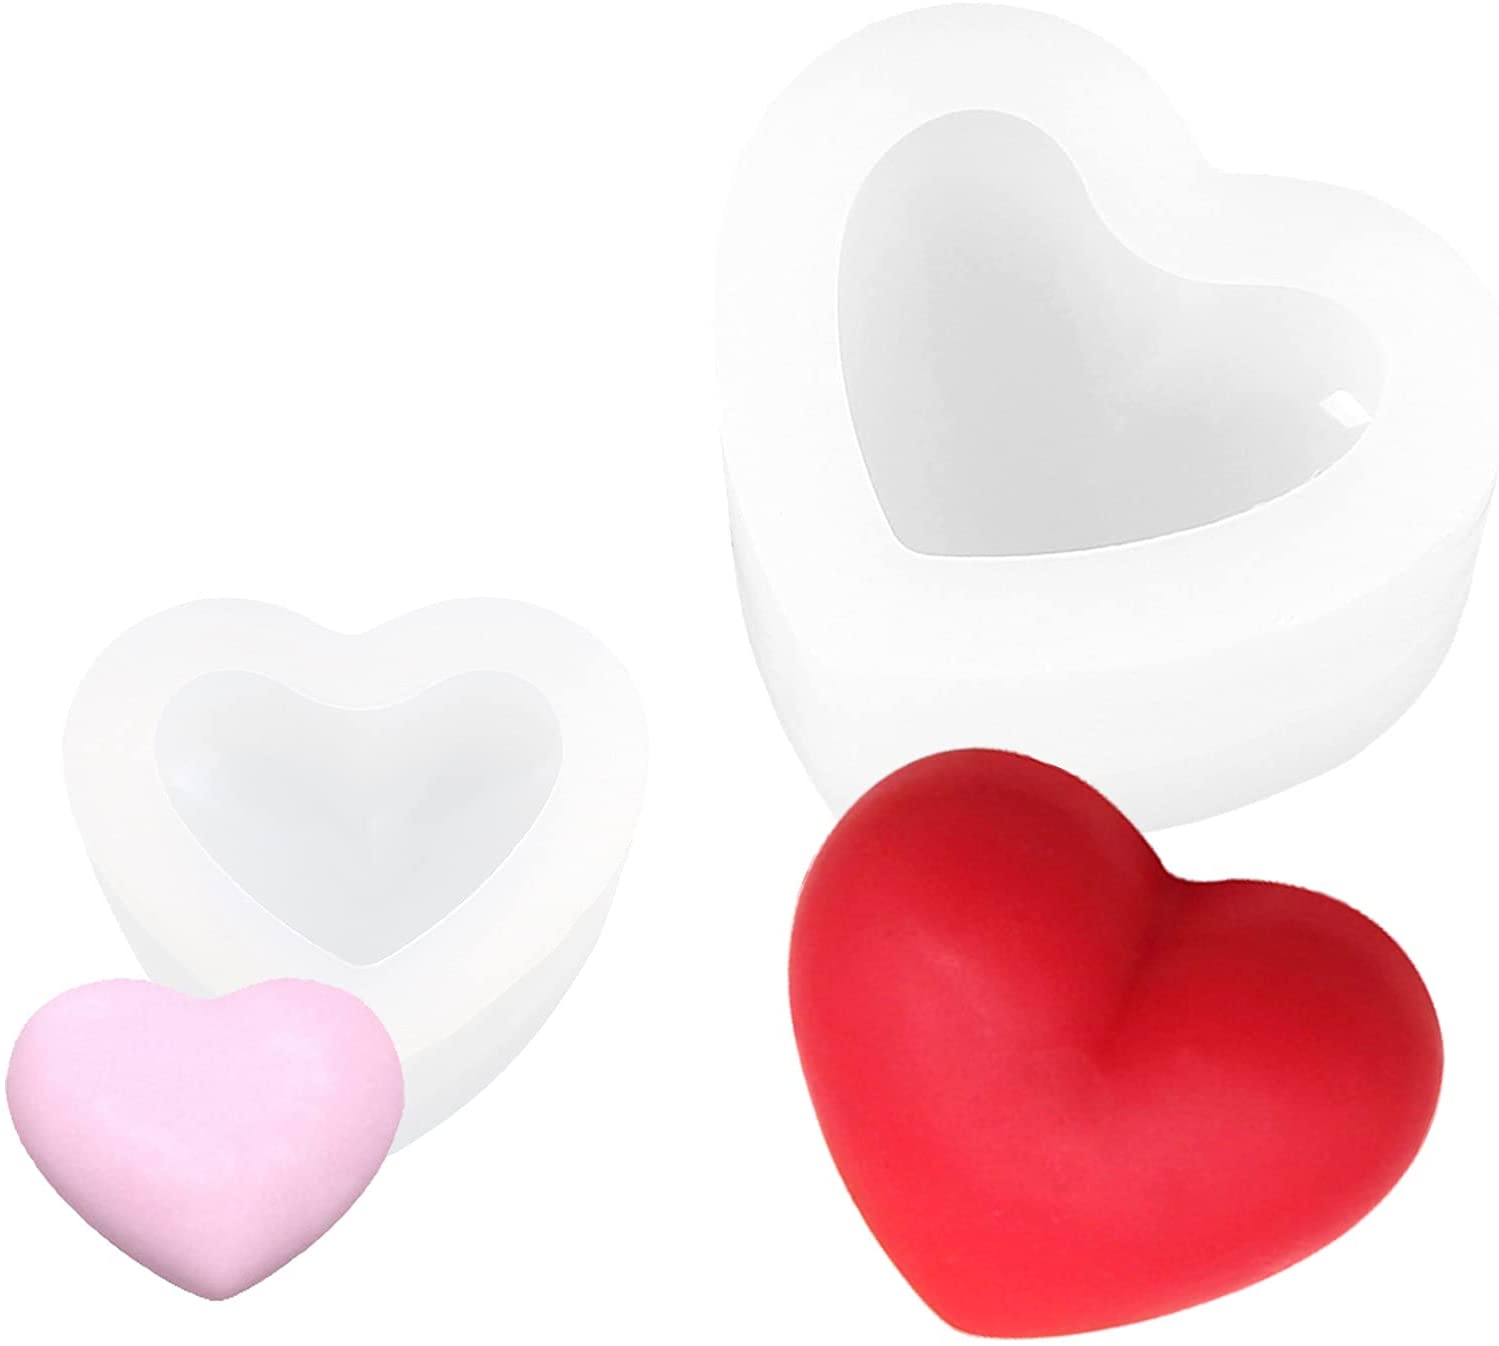 2-Pcs-Love-Heart-Shape-Silicone-Mold-Silicone-Moulds-3D-Heart-Soap-Mold-for-DIY-Handmade-Soap-Crafts-Silicone-Heart-Pend-B094XZ22RW.jpg